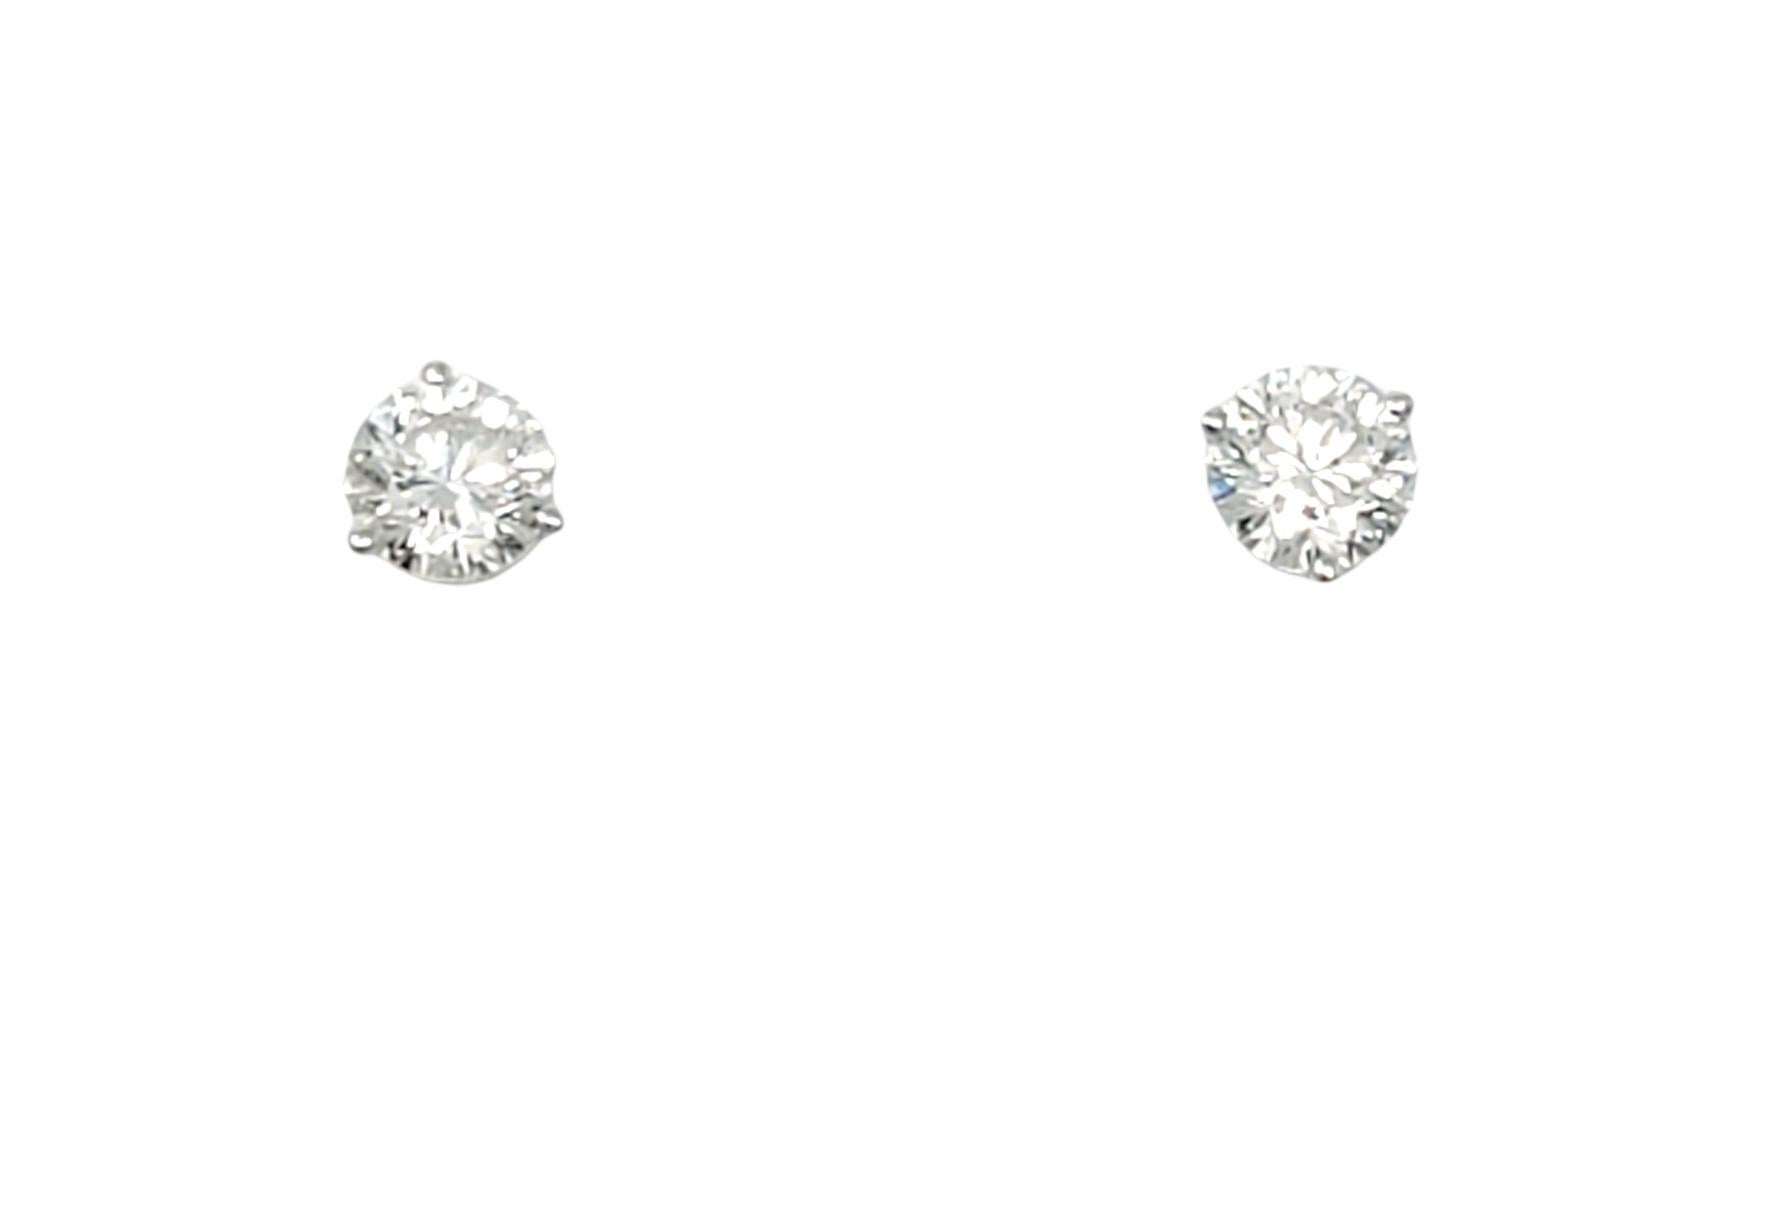 Utterly timeless diamond solitaire stud earrings. These gorgeous round diamond and white gold pierced ear studs are the epitome of minimalist elegance. They give just the right hint of sparkle for everyday wear and the classic design ensures they